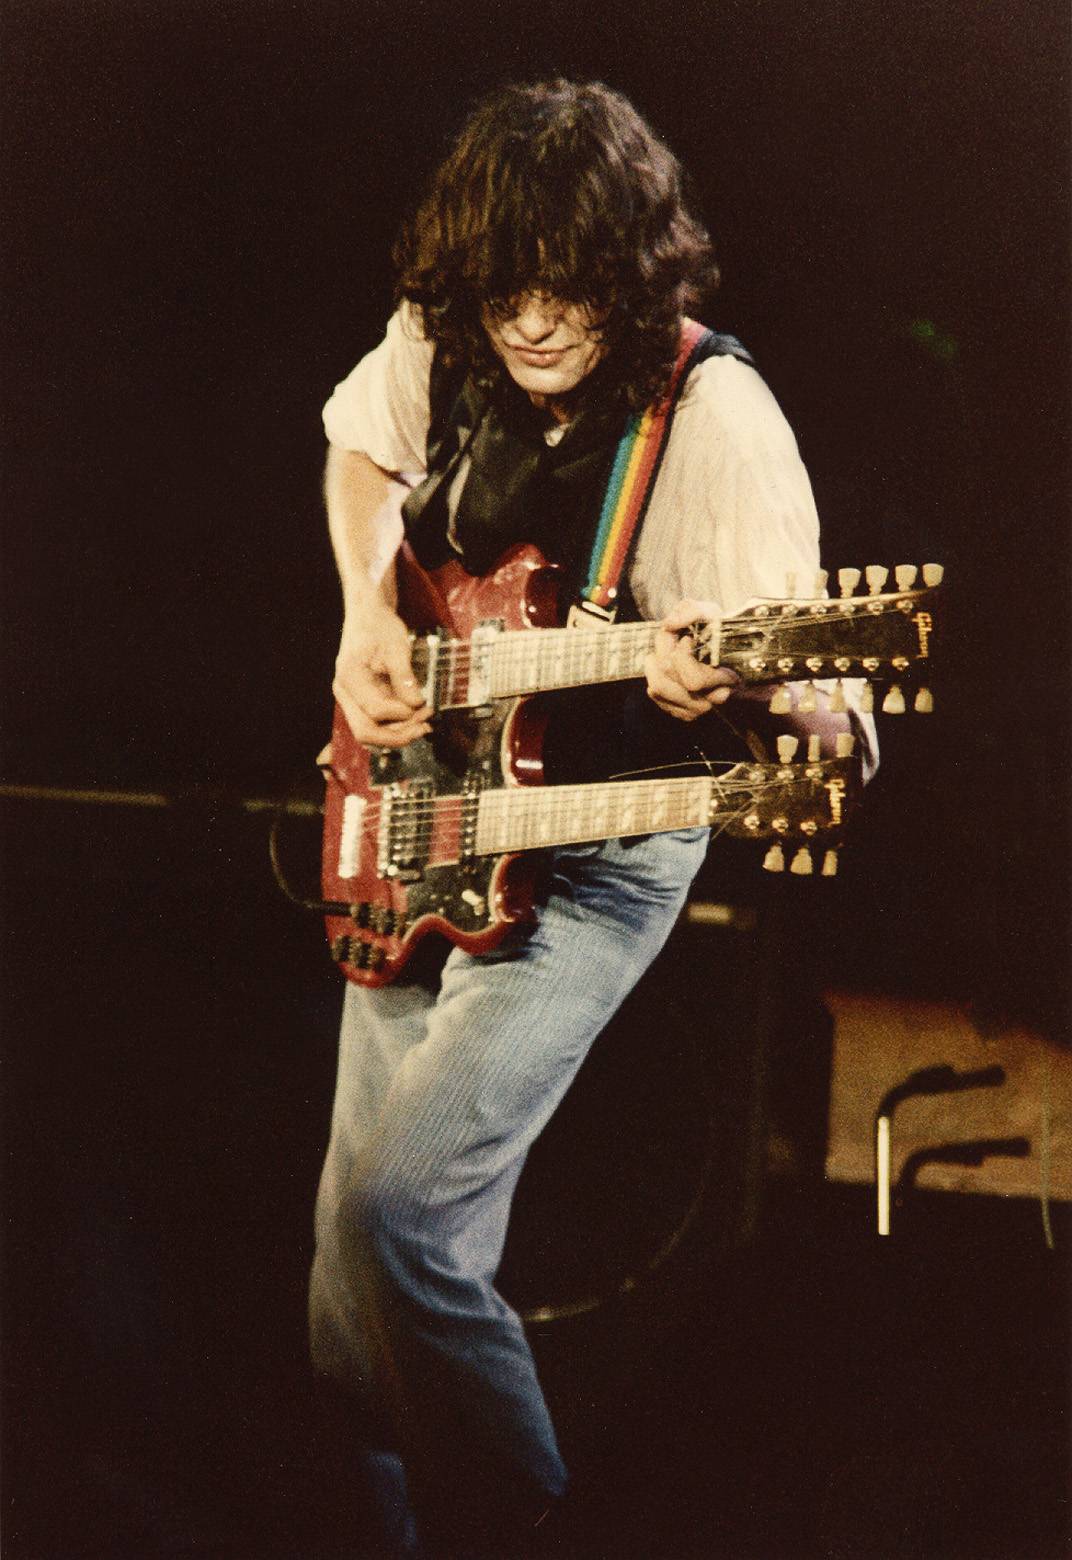 Happy Birthday to one of the best guitarists of all time, Jimmy Page! 